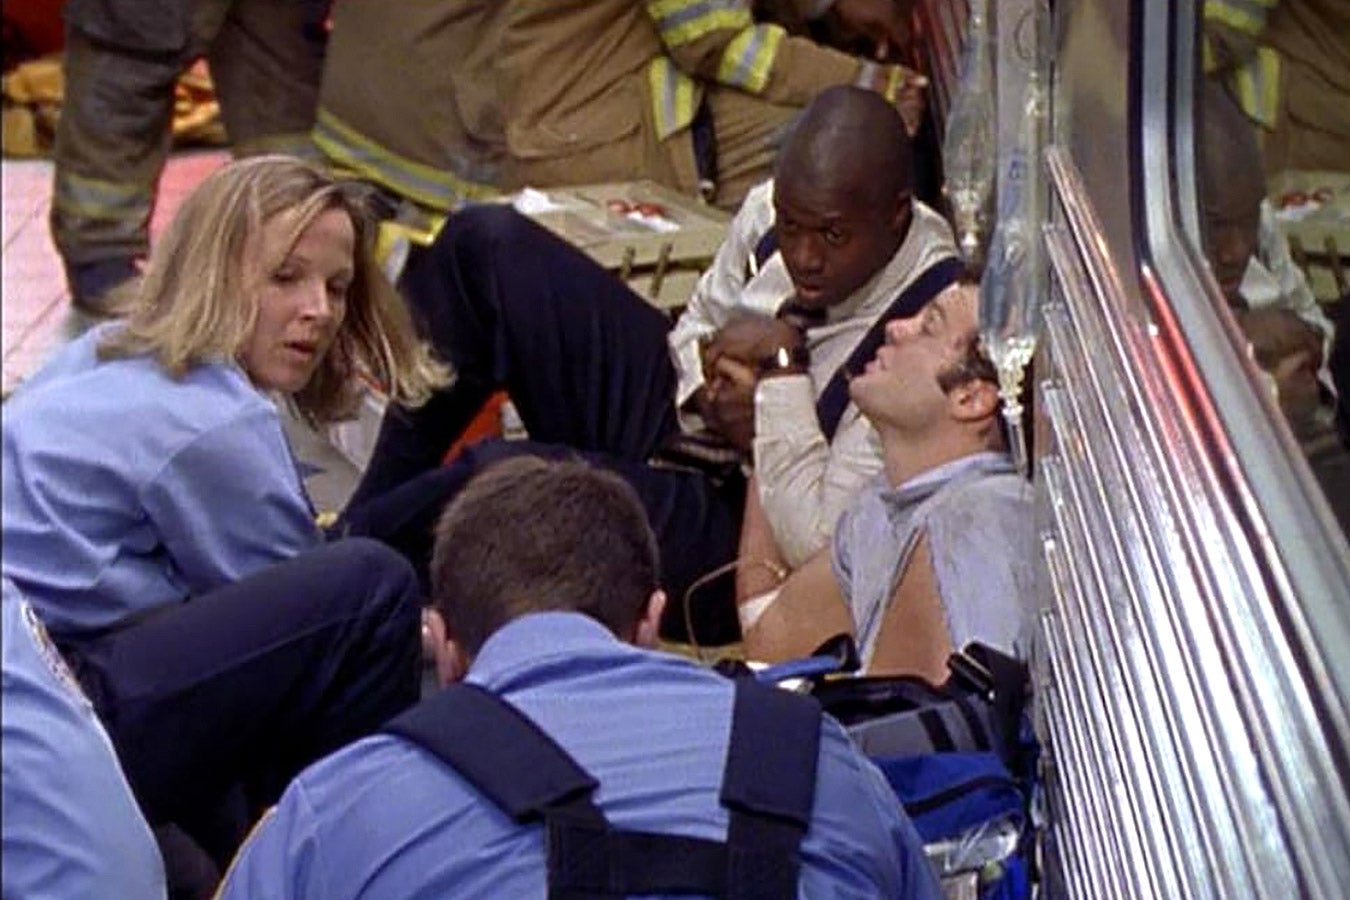 EMTs examine a trapped subway passenger at the scene of a crash.